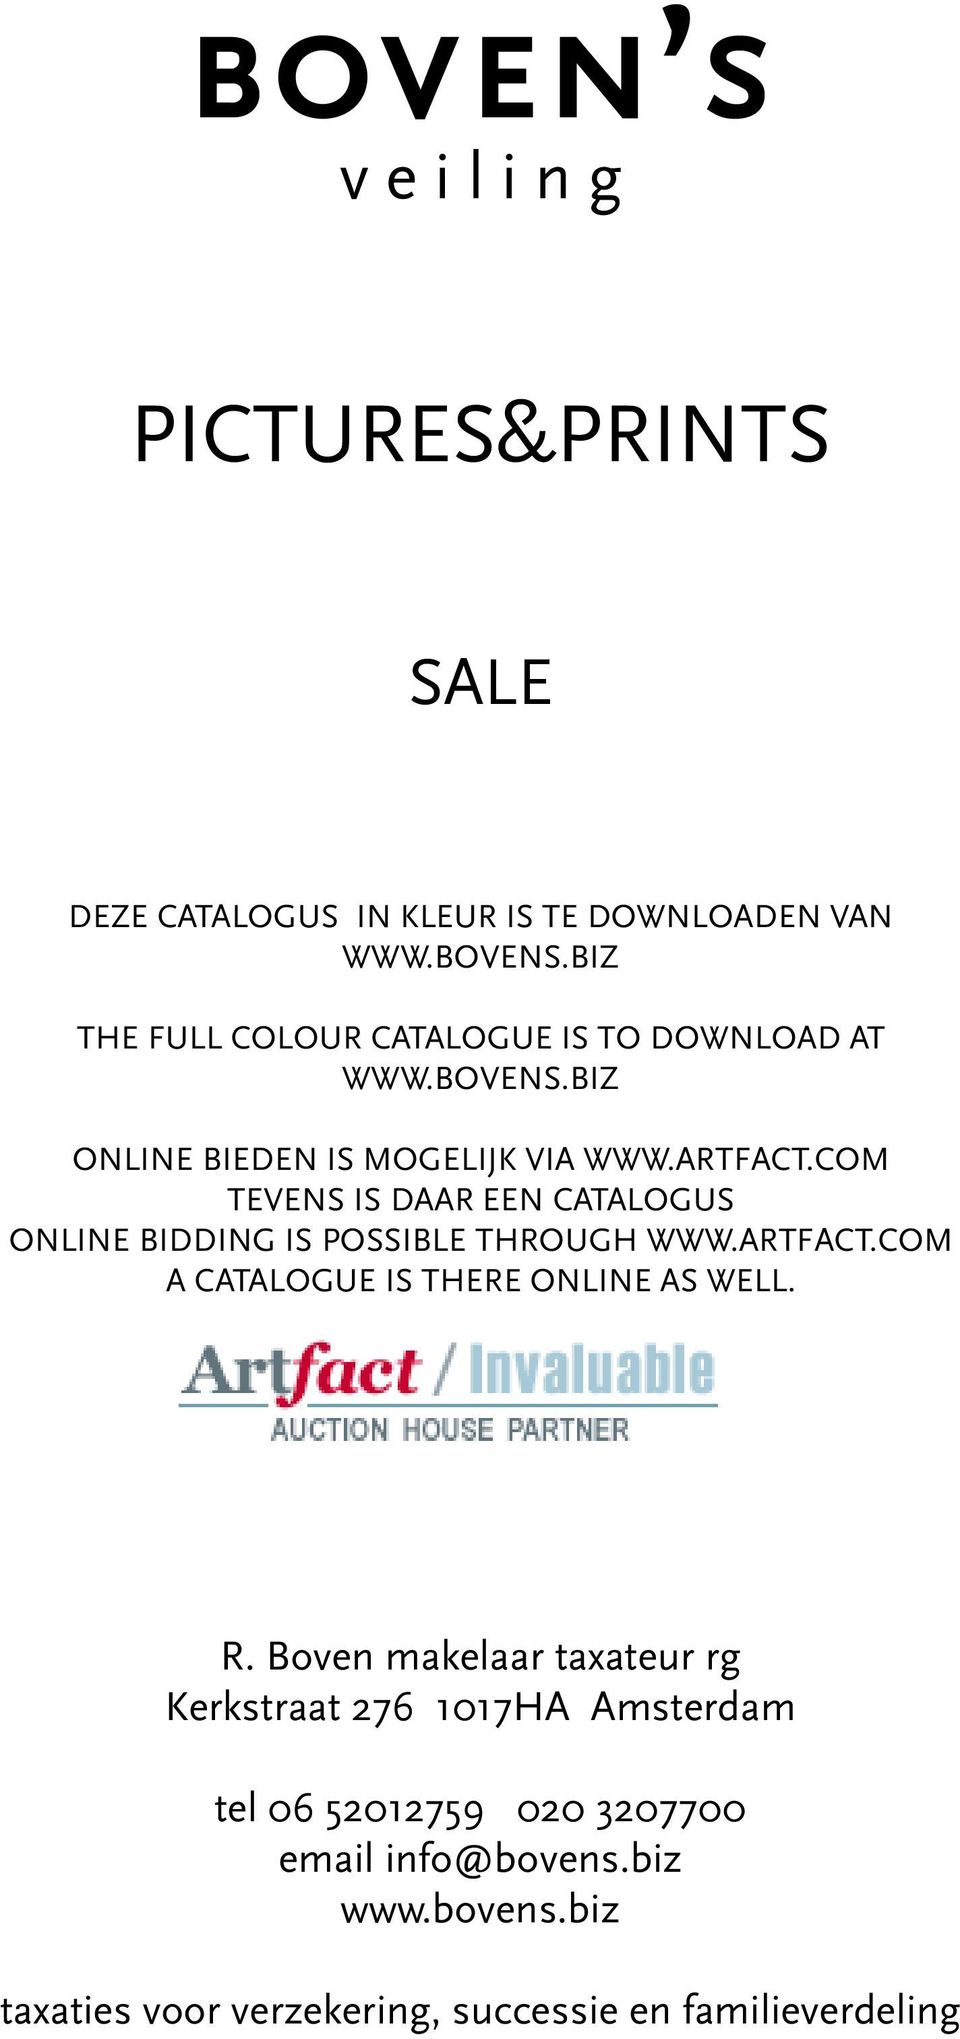 COM TEVENS IS DAAR EEN CATALOGUS ONLINE BIDDING IS POSSIBLE THROUGH WWW.ARTFACT.COM A CATALOGUE IS THERE ONLINE AS WELL. R.